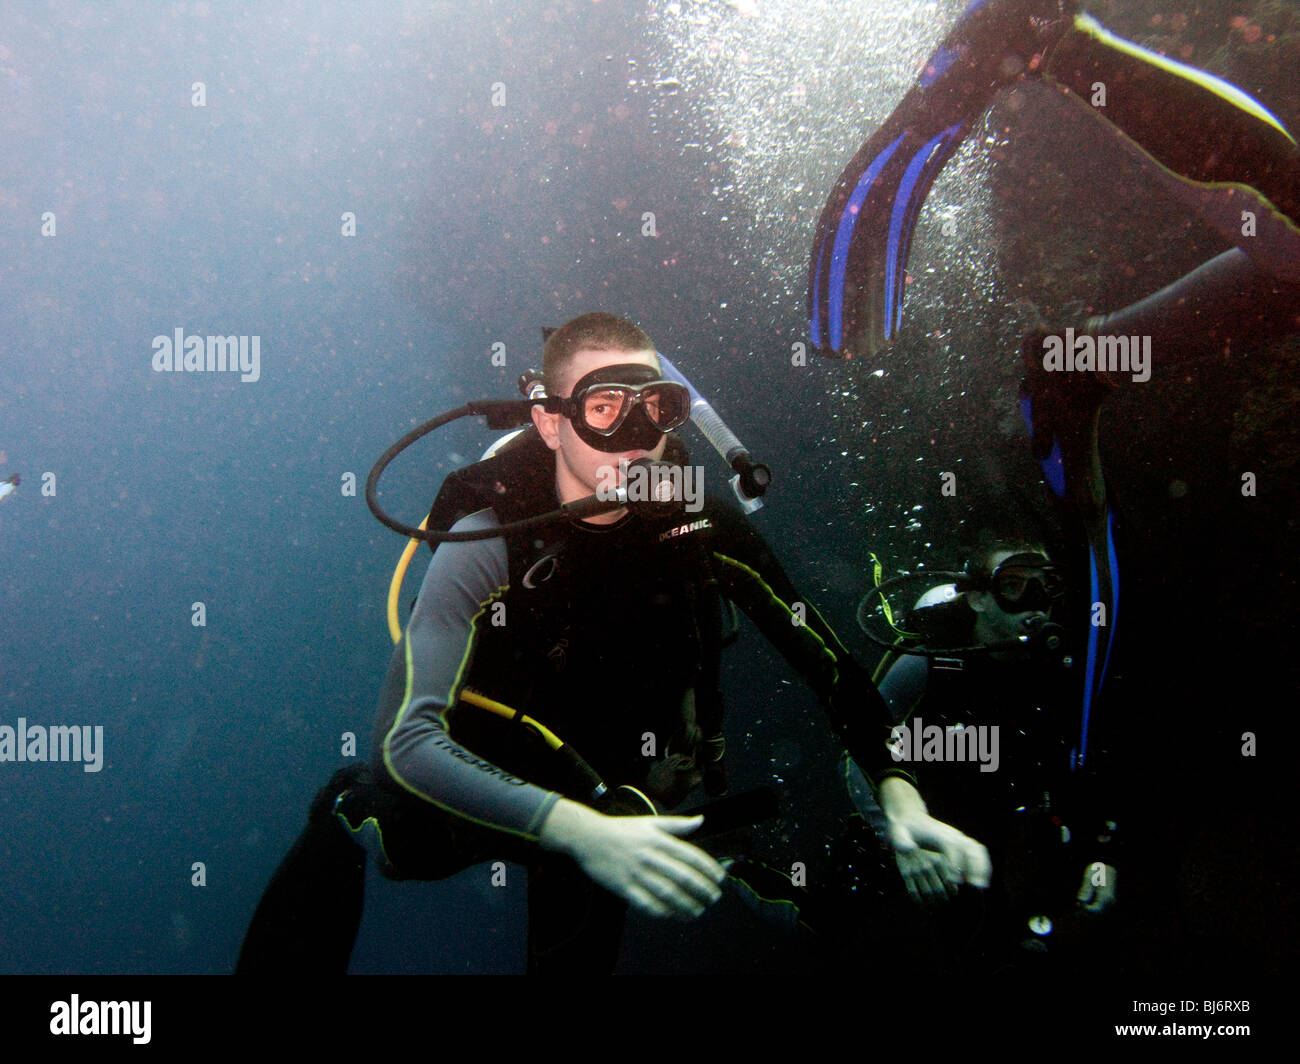 Indonesia, Sulawesi, Wakatobi National Park, underwater, young scuba diver learning to dive underwater Stock Photo